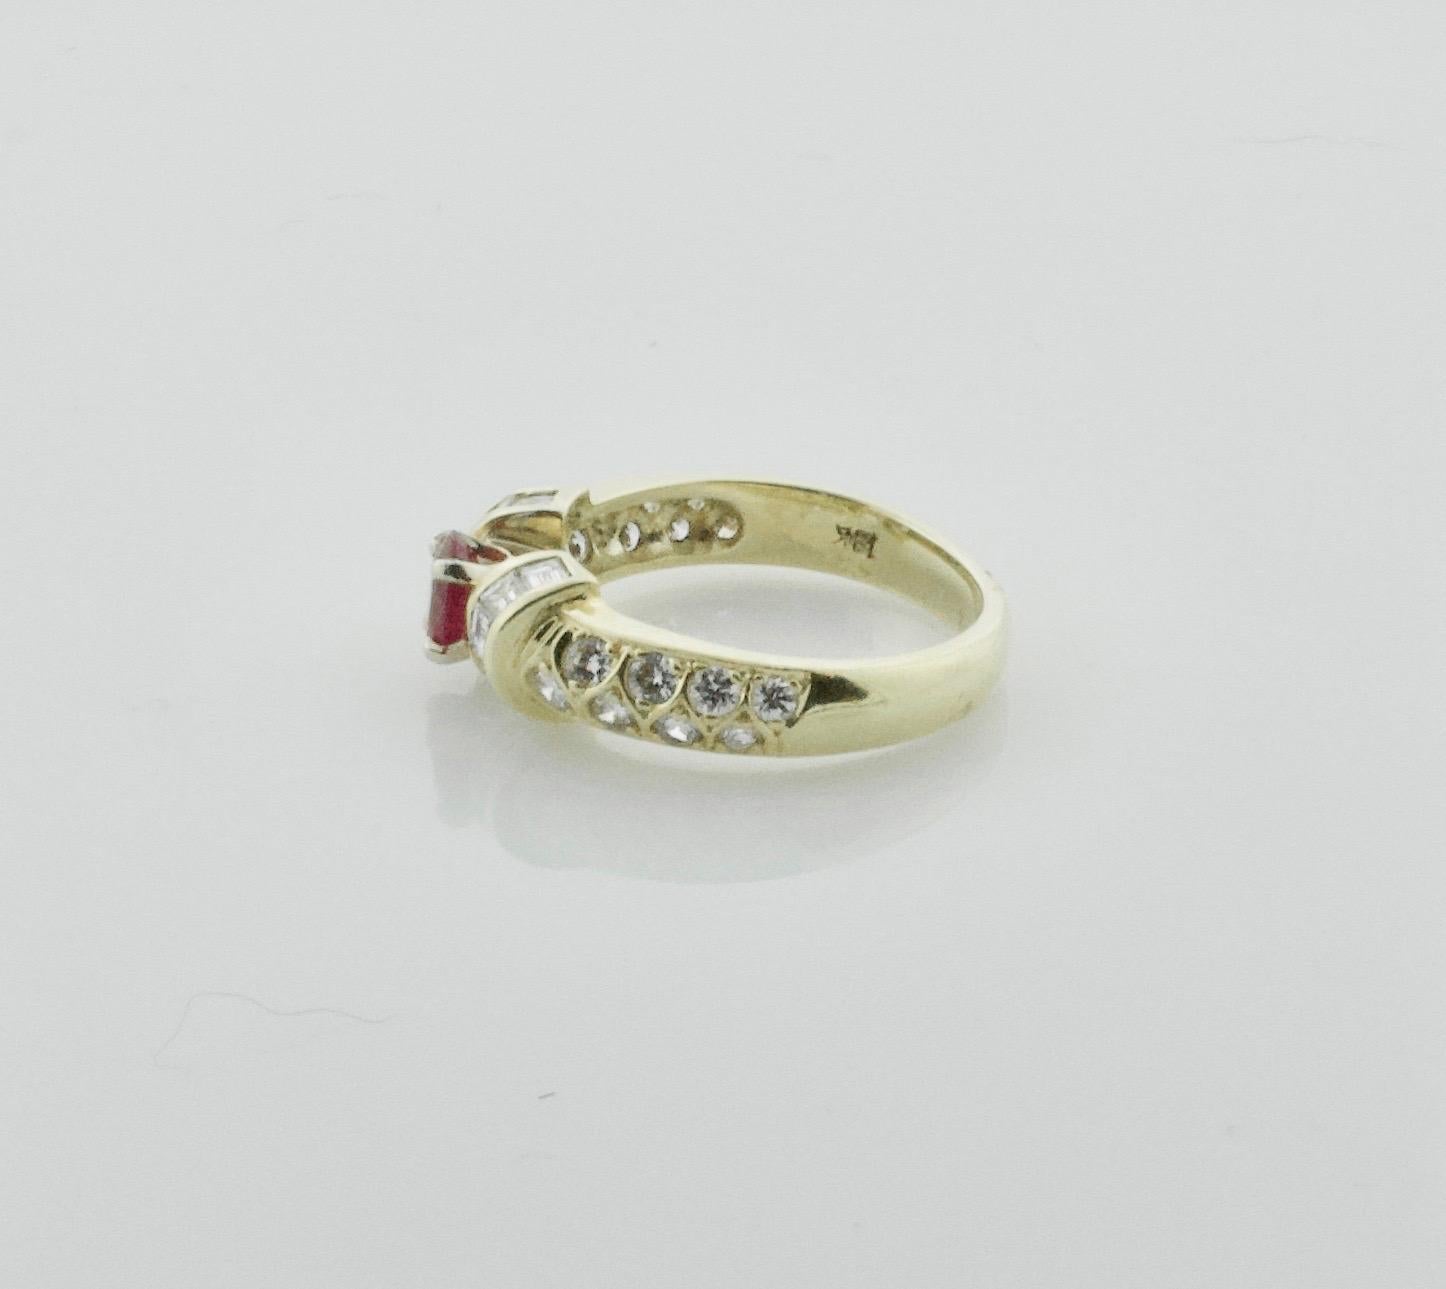 Ruby and Diamond Band Ring in 18k Yellow Gold
One Oval Ruby Weighing .50 Carats Approximately [bright with no imperfections visible to the naked eye]
Ten Round Brilliant Cut Diamonds Weighing .30 Carats Approximately [GH VVS-VS]
Sixteen Round